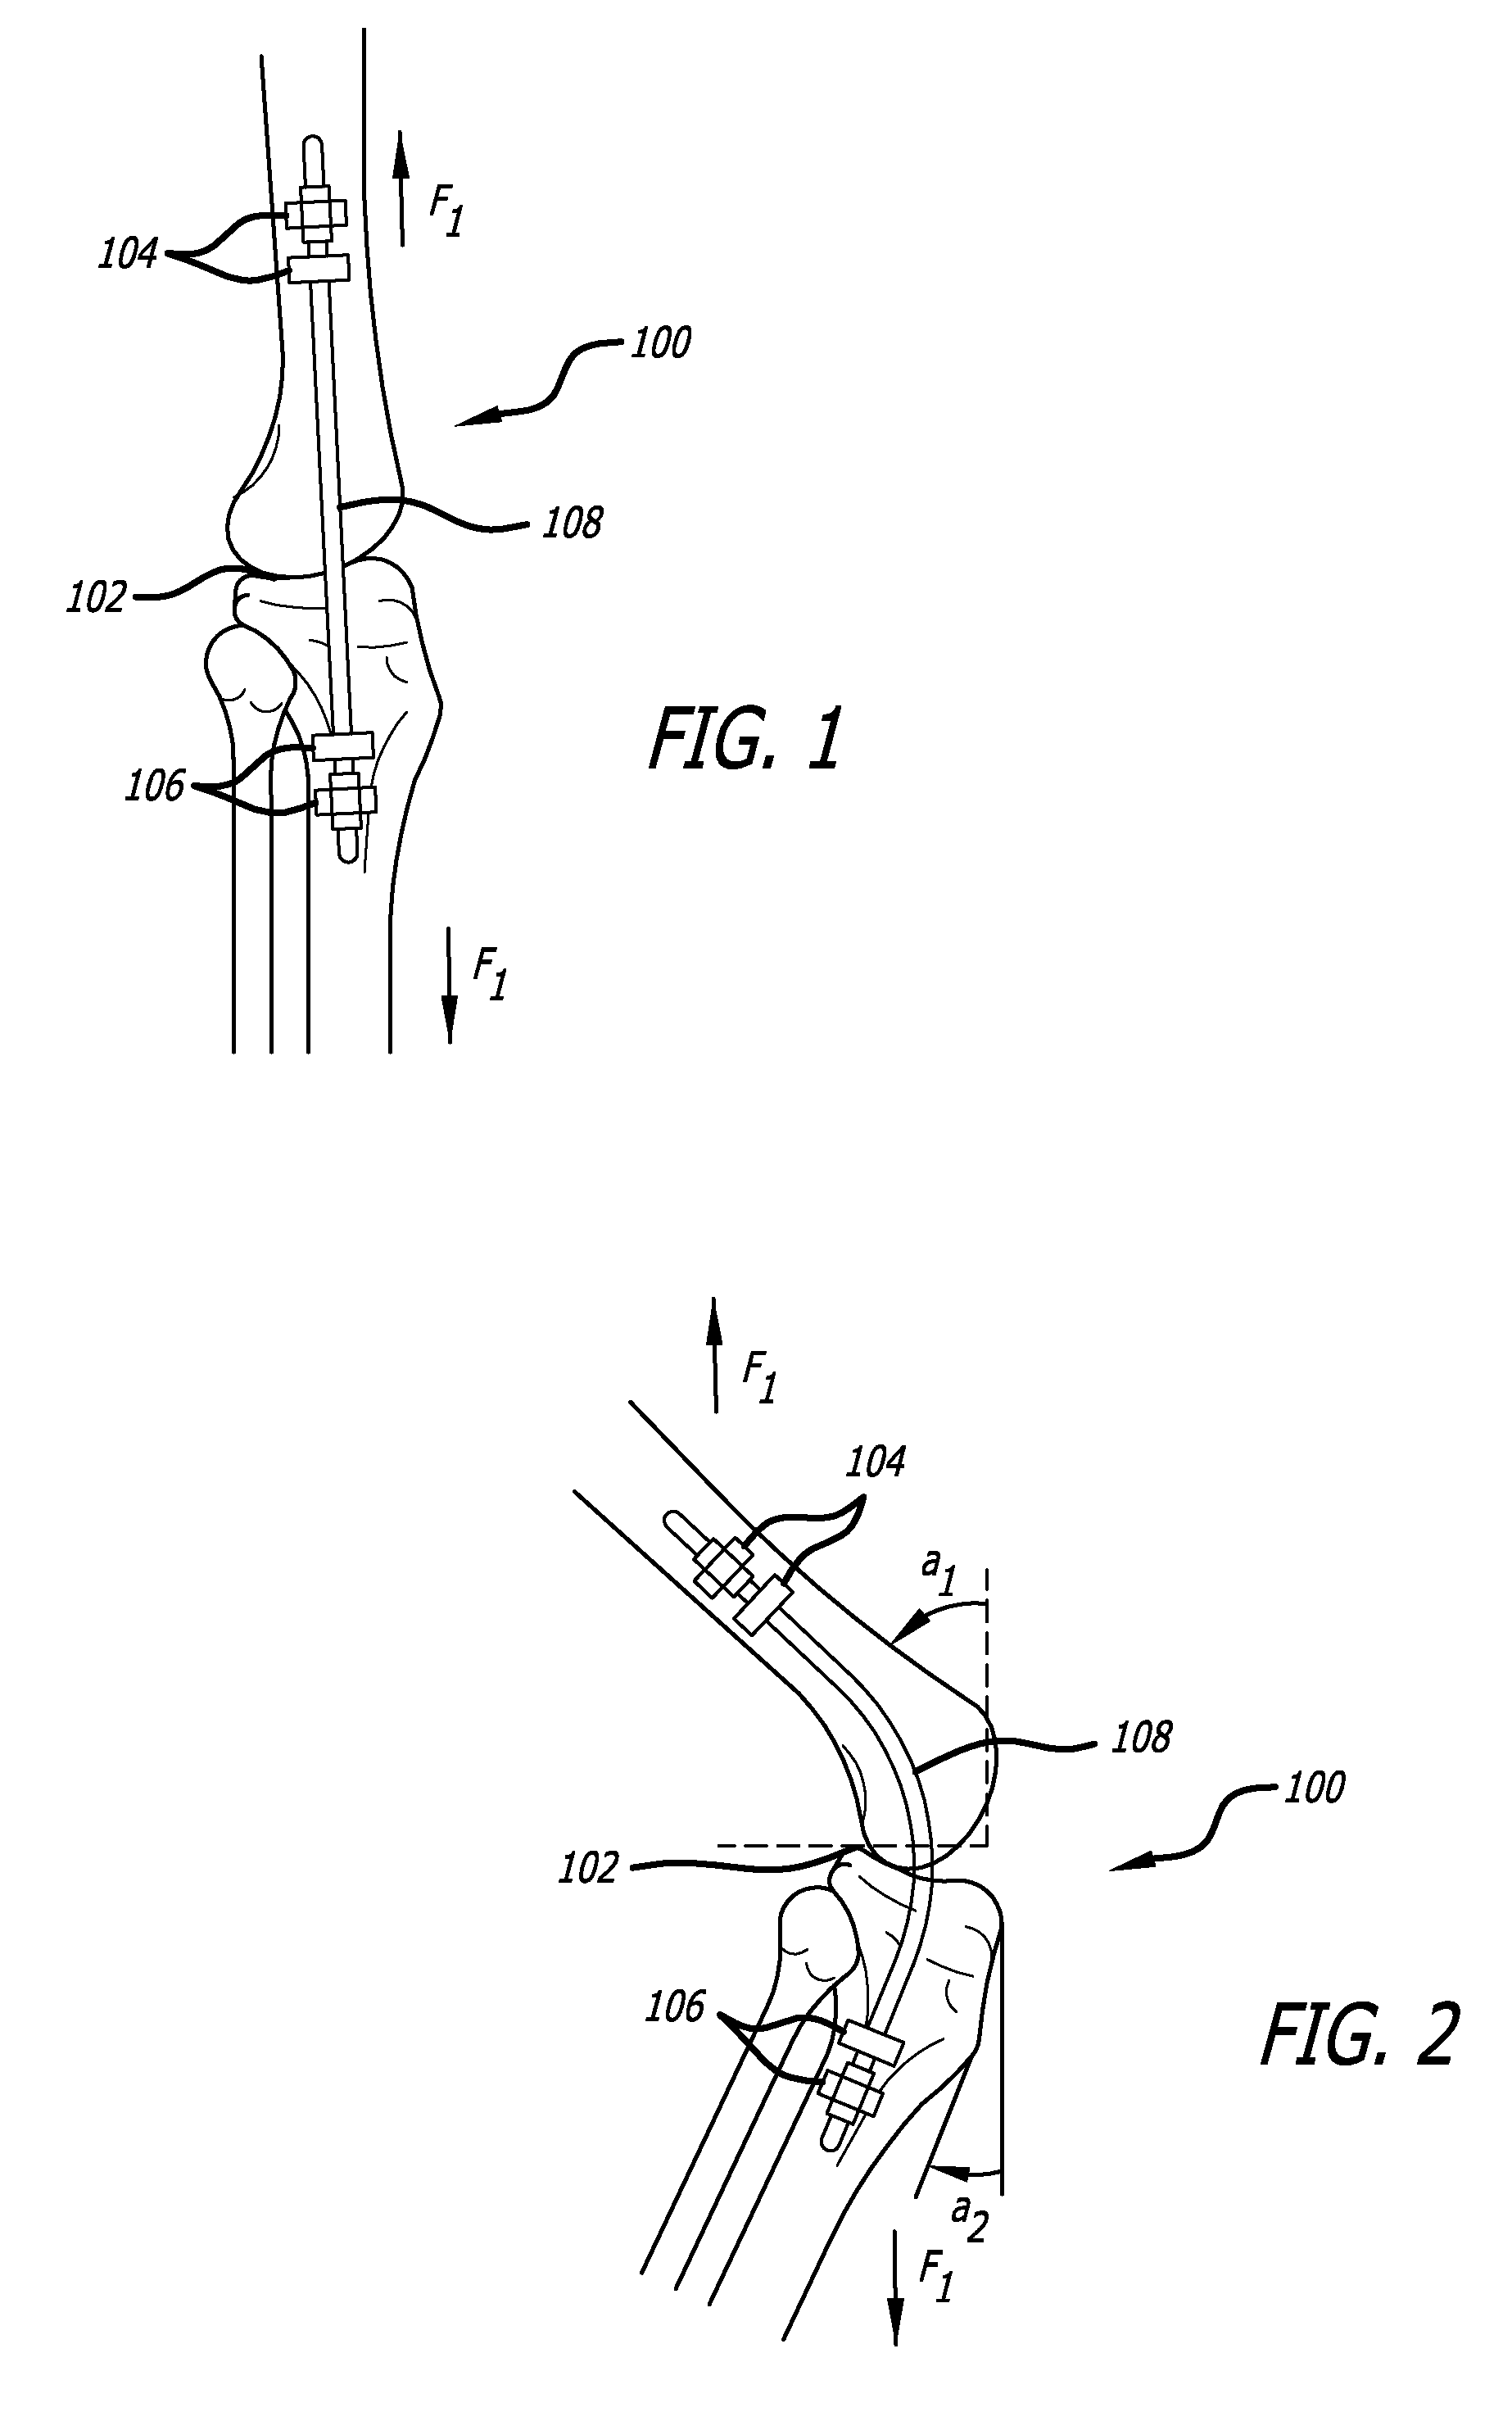 Extra-Articular Implantable Mechanical Energy Absorbing Systems